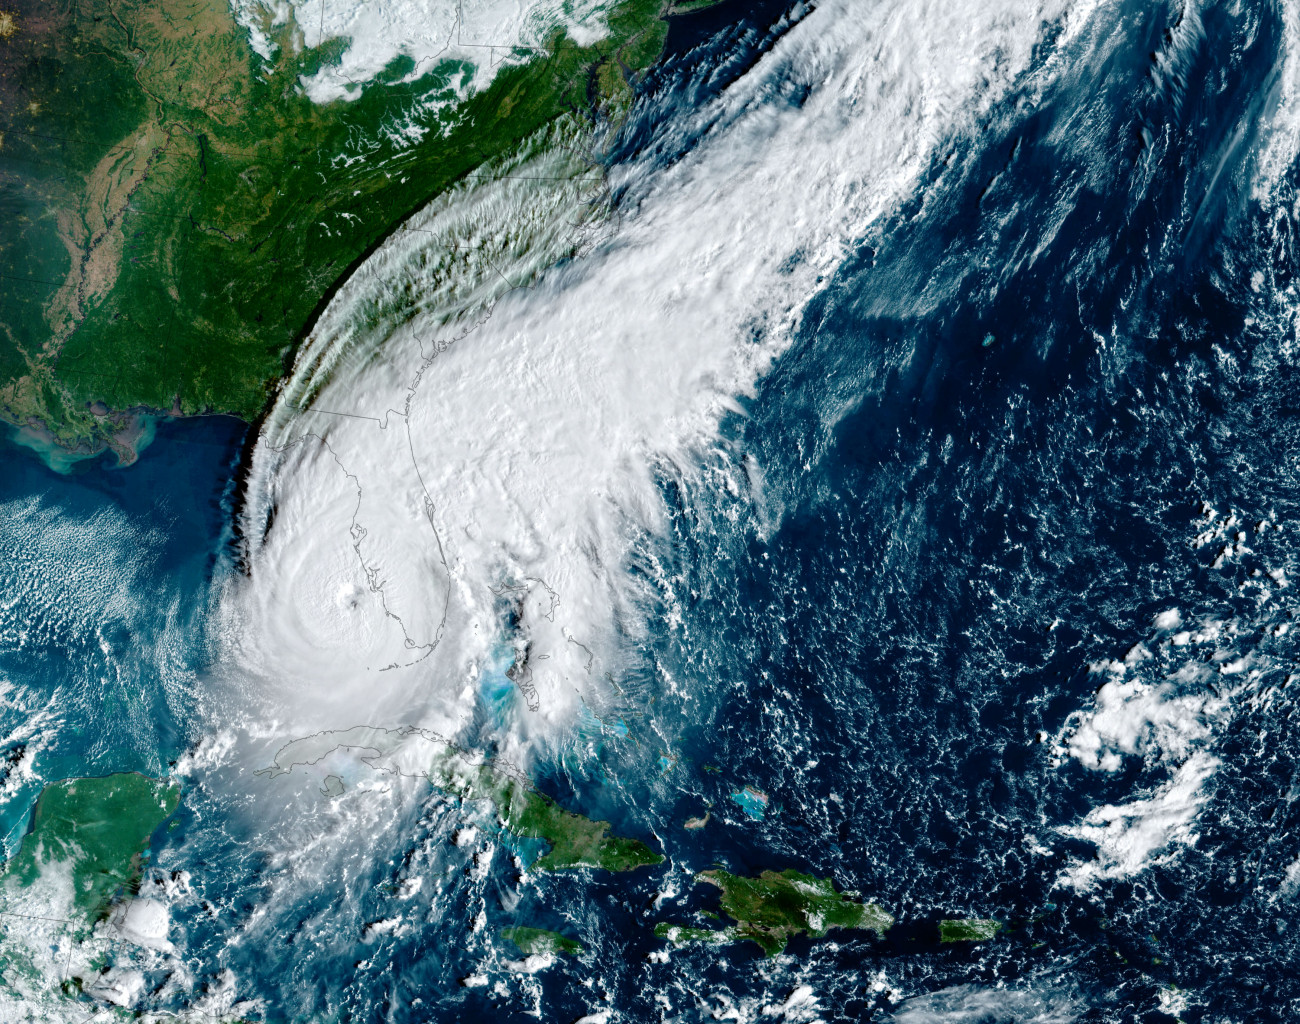 GULF OF MEXICO - SEPTEMBER 28:  In this NOAA handout image taken by the GOES satellite at 13:10 UTC, Hurricane Ian approaches Florida on September 28, 2022 in the Gulf of Mexico. The storm is expected to bring a potentially life-threatening storm surge and hurricane-force winds. (Photo by NOAA via Getty Images)